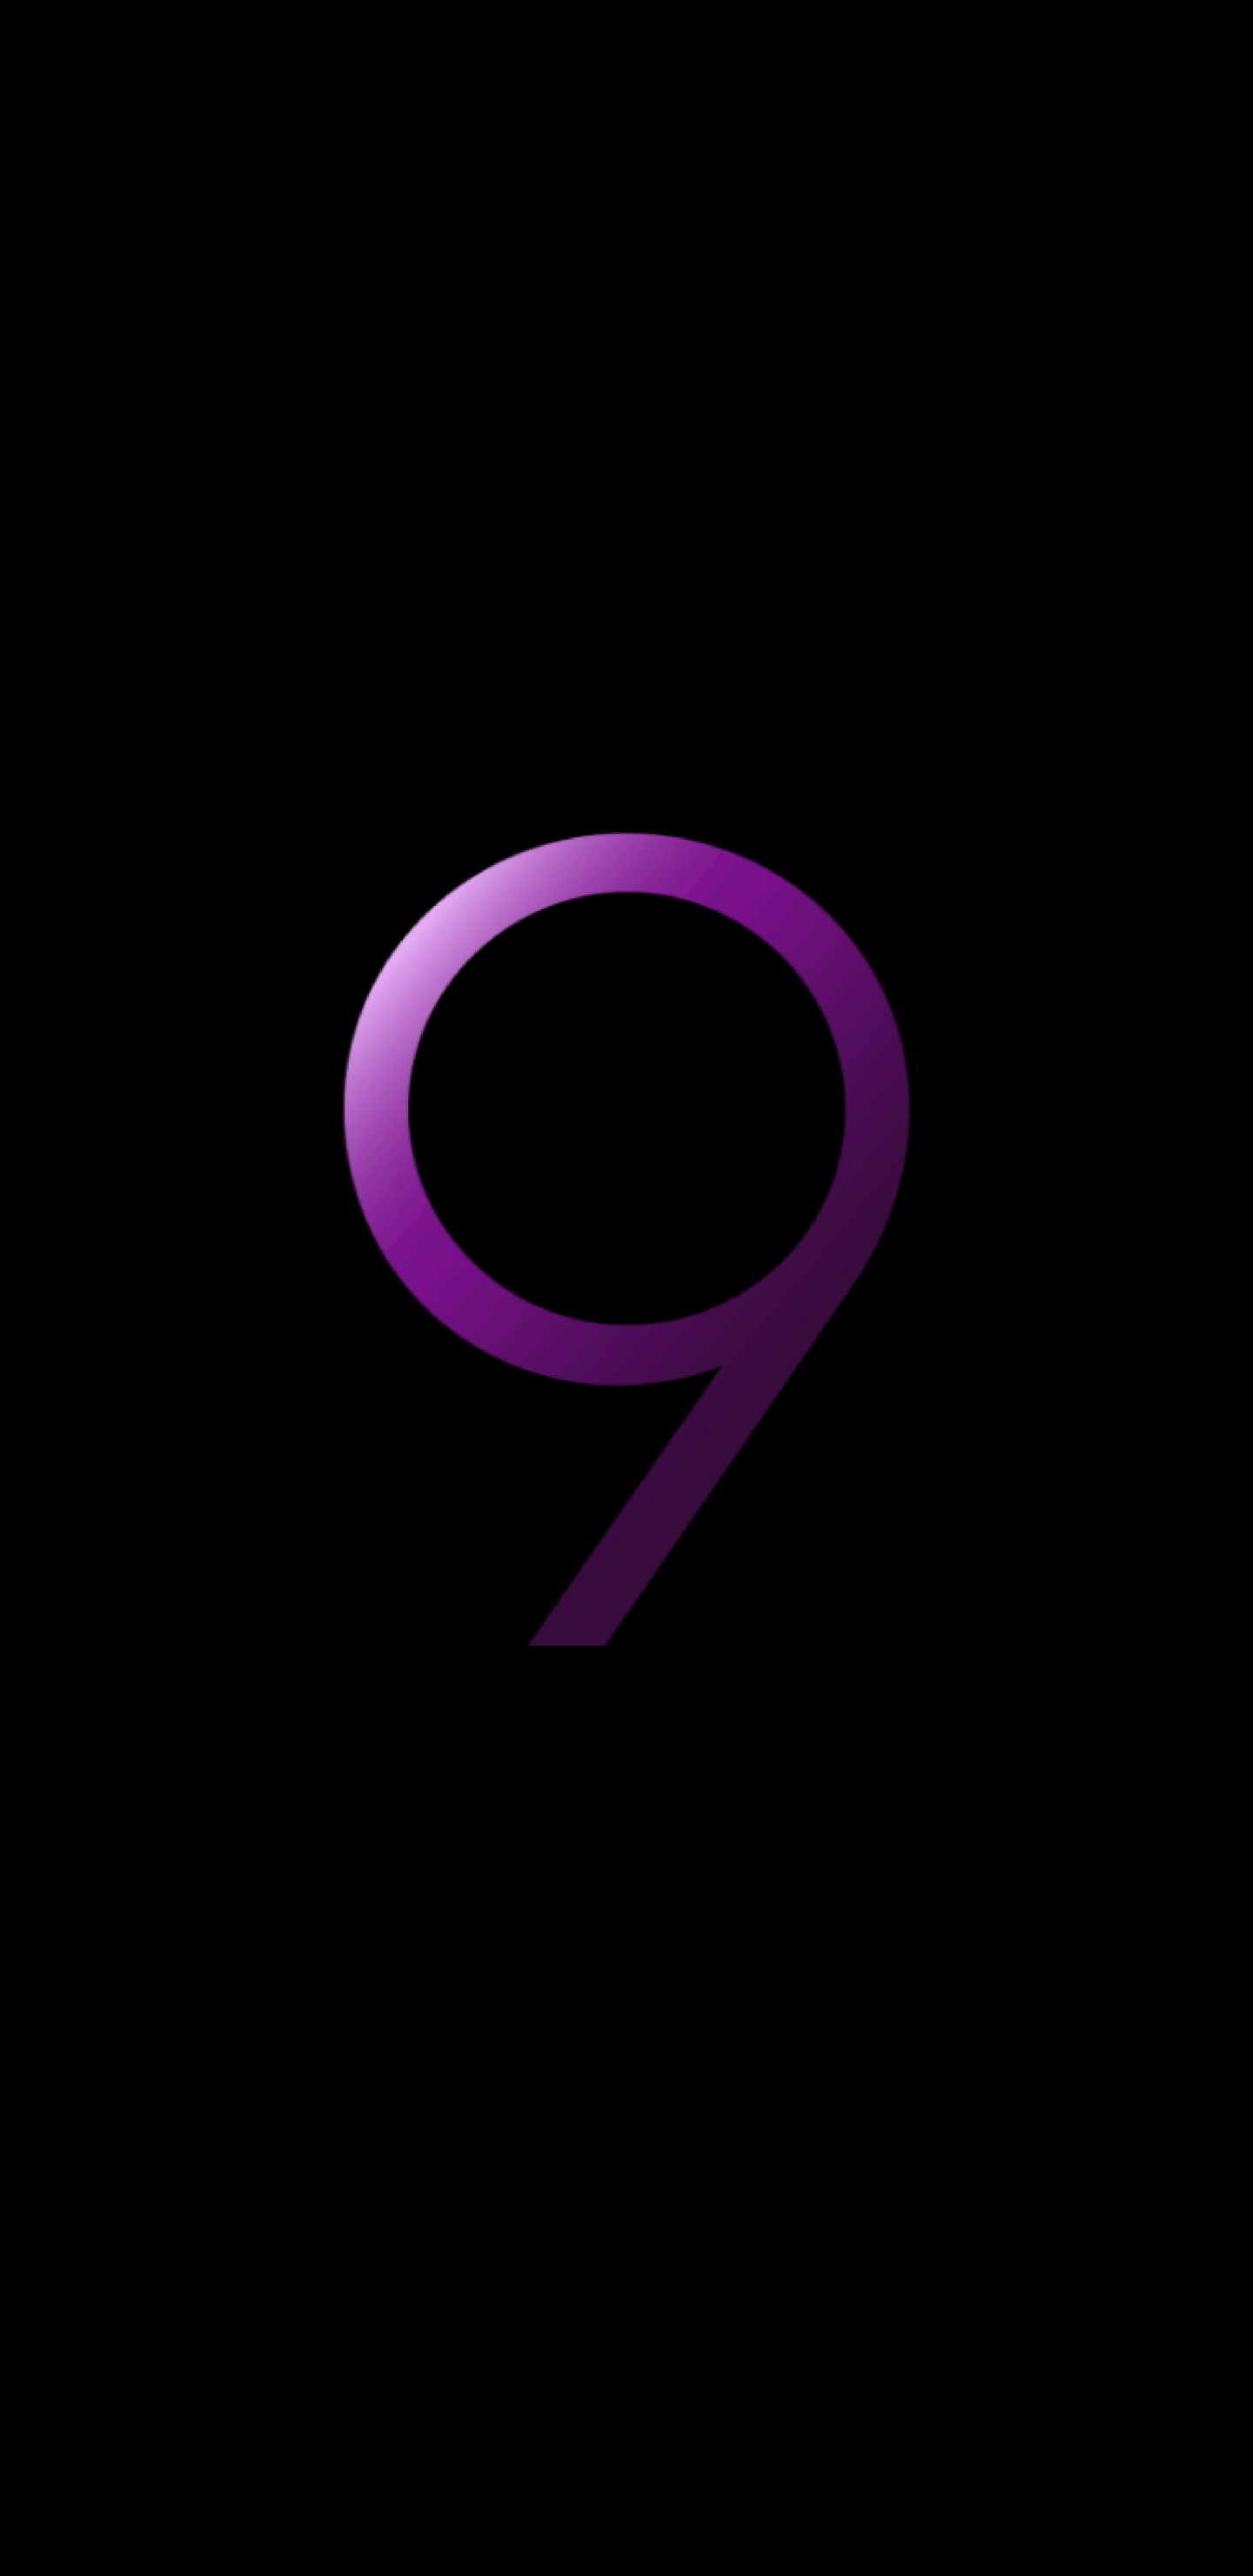 Galaxy S9 Plus Wallpapers - Top Free